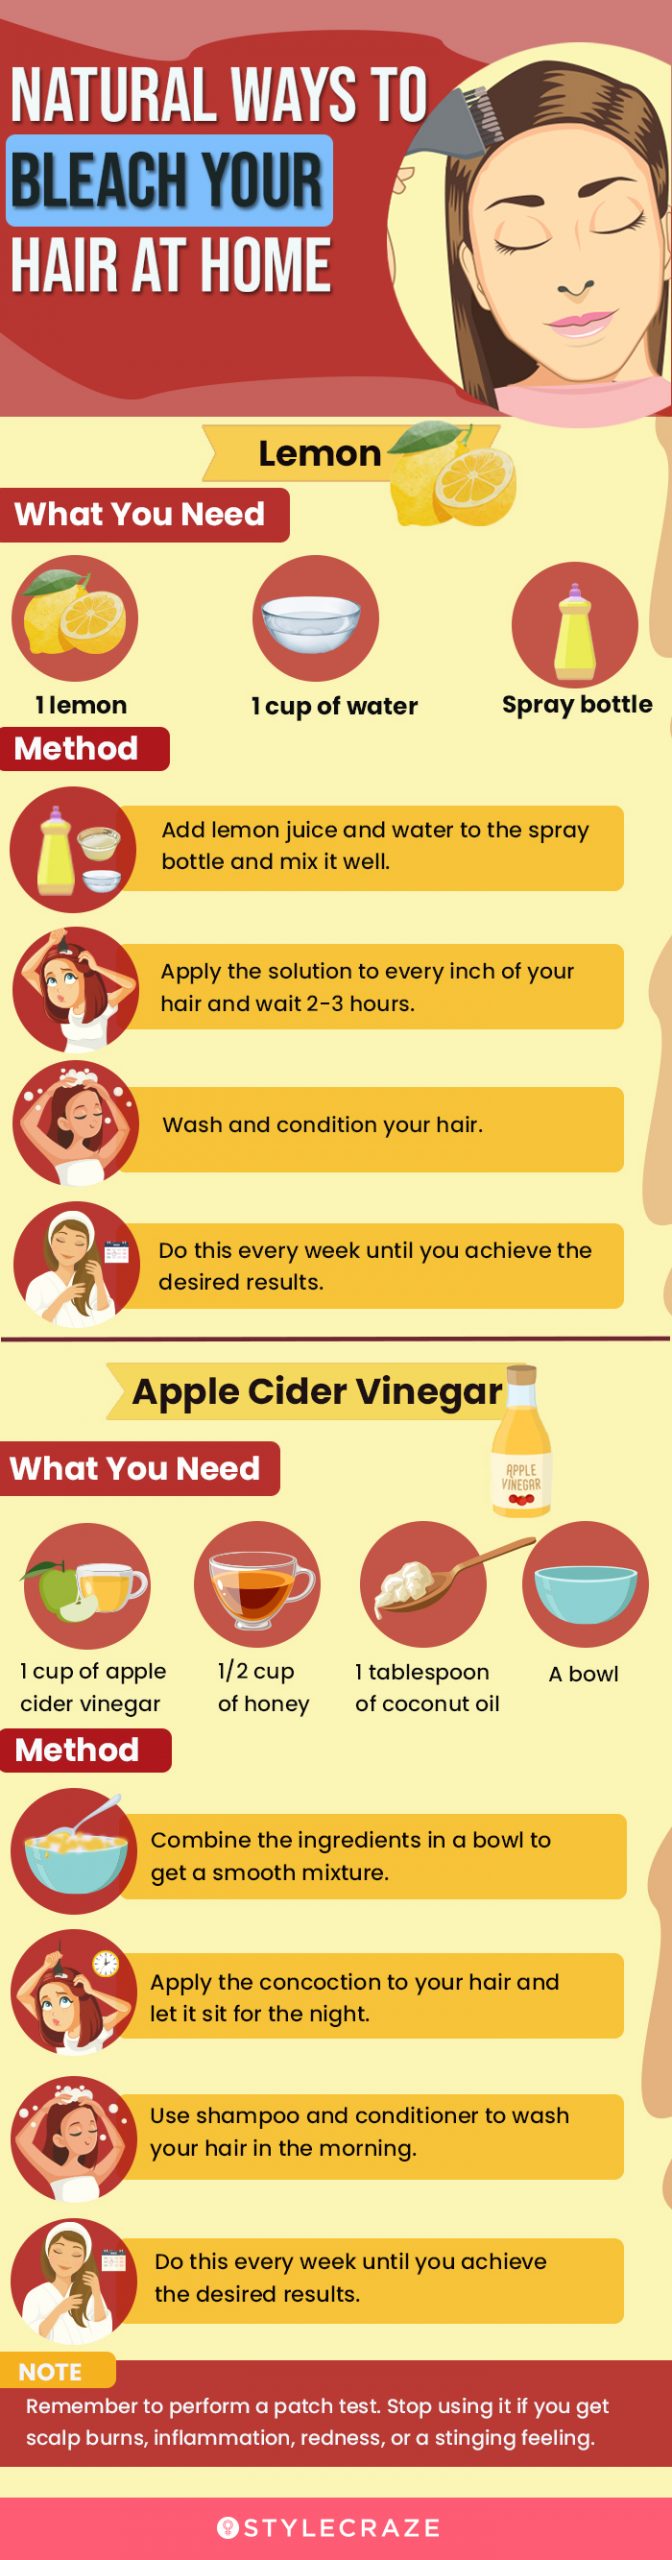 natural ways to bleach your hair at home [infographic]